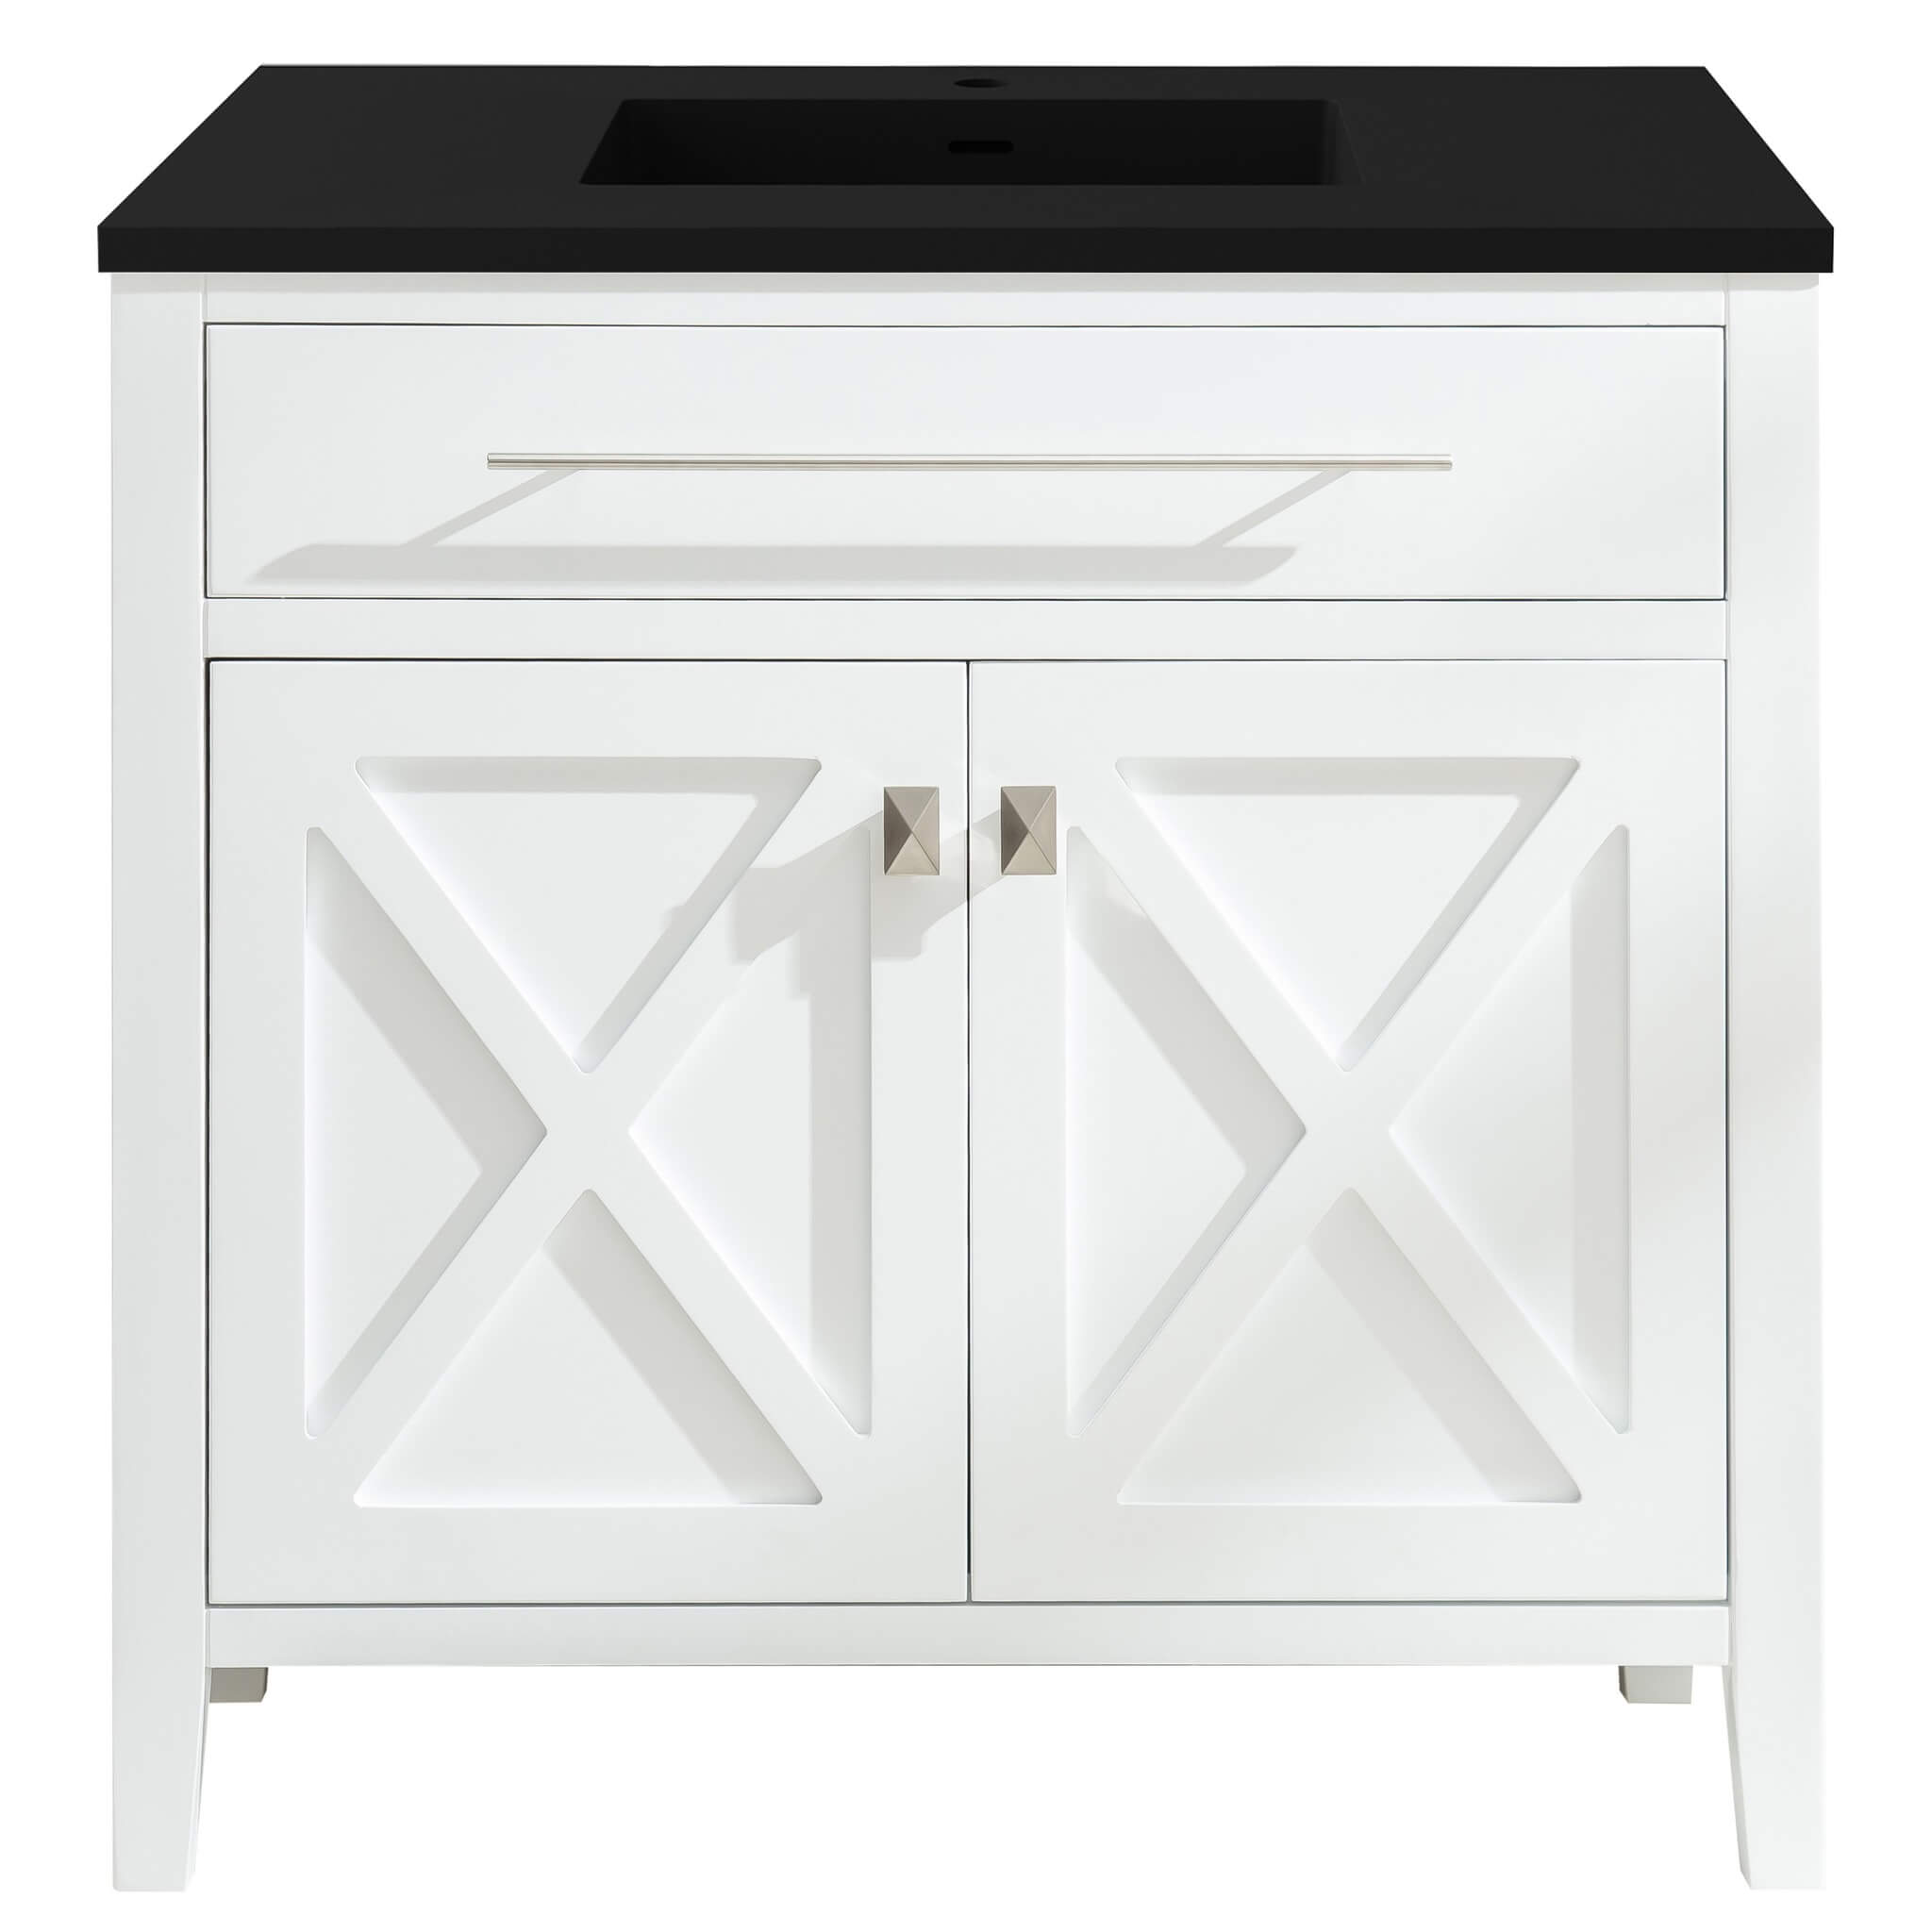 LAVIVA Wimbledon 313YG319-36W-MB 36" Single Bathroom Vanity in White with Matte Black VIVA Stone Surface, Integrated Sink, Front View